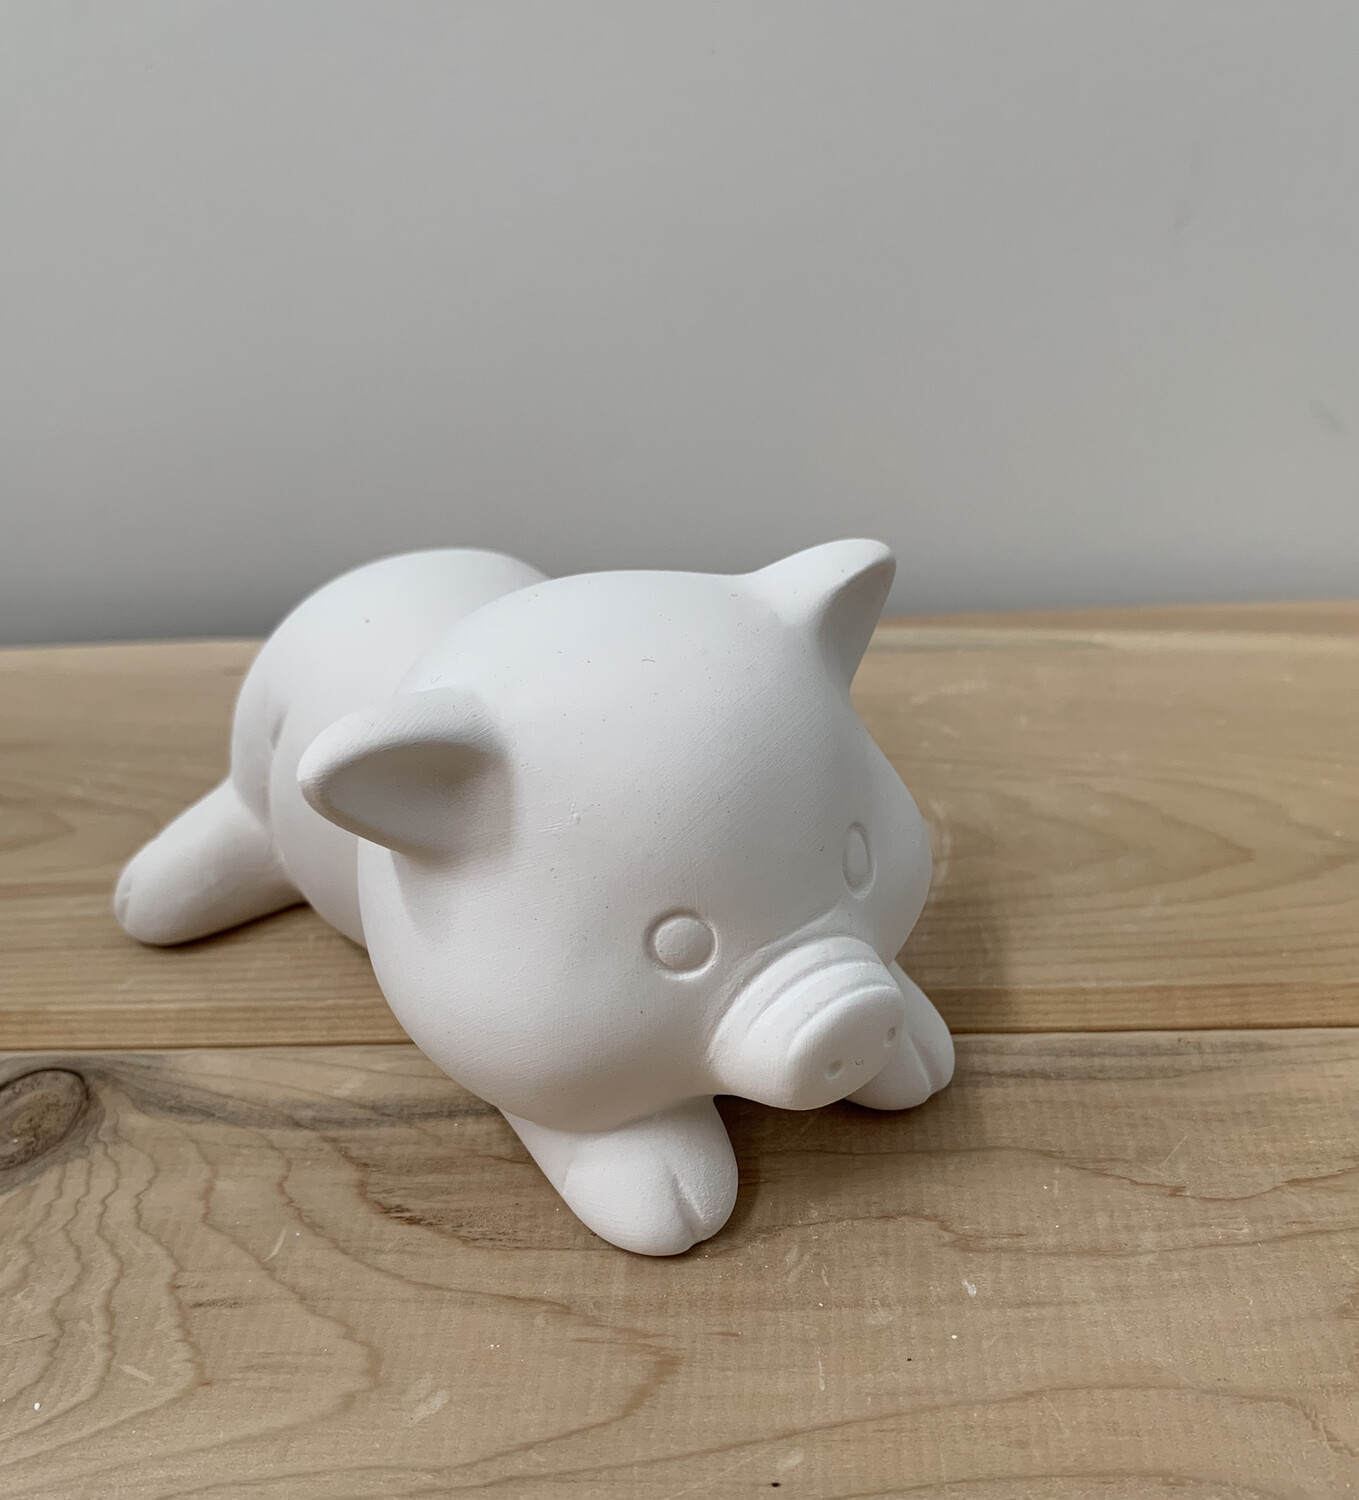 Paint Your Own Pottery - Ceramic
Wilbur Pig Figurine Painting Kit